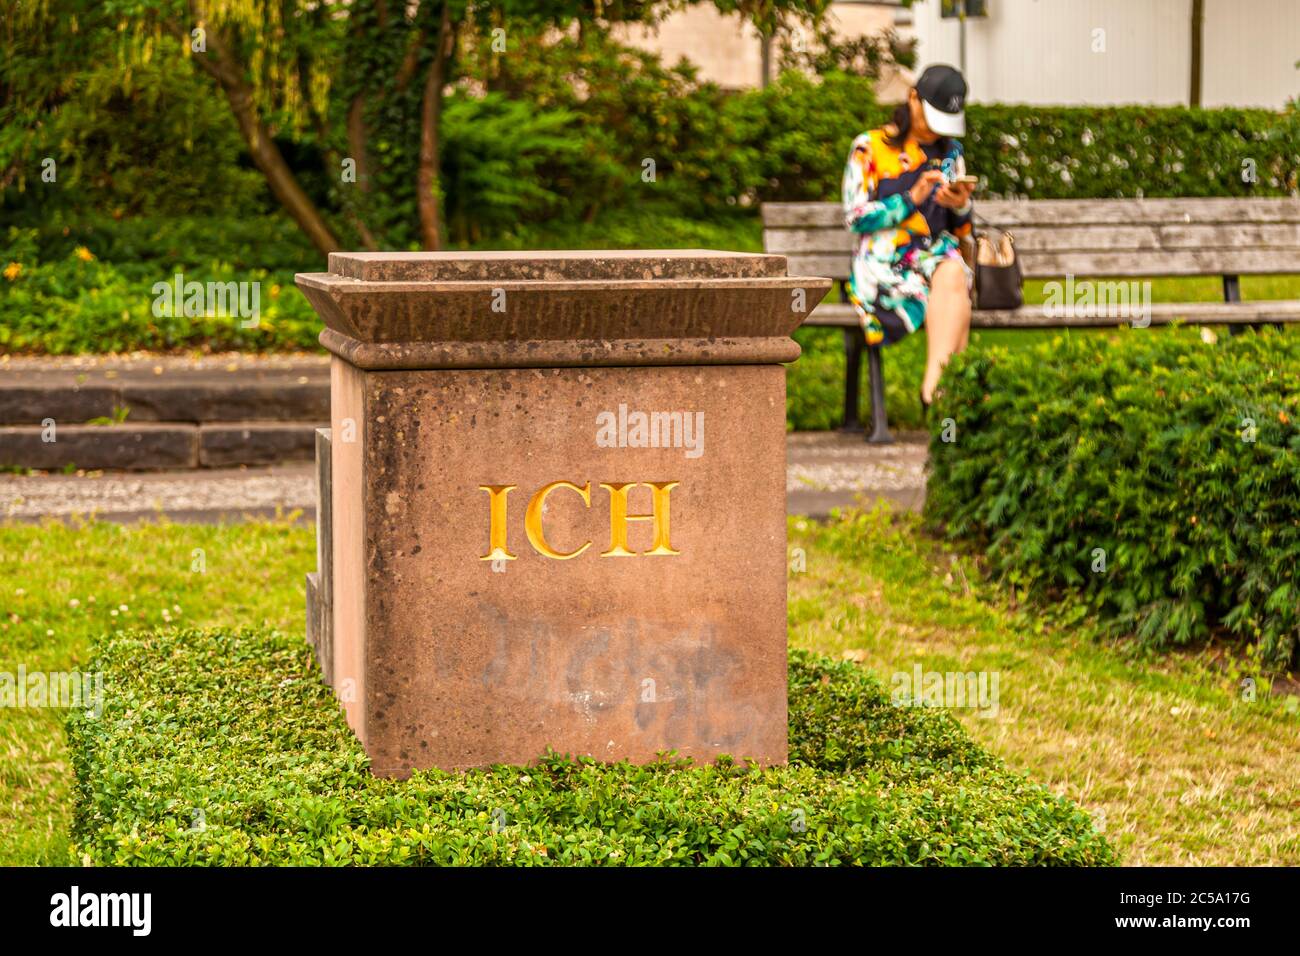 Your self in the center of consideration. The plinth for self-exaltation, also a permanent memento of a Documenta show, can be found directly and permanently in front of the gate guards. Documenta Impressions in Kassel, Germany Stock Photo